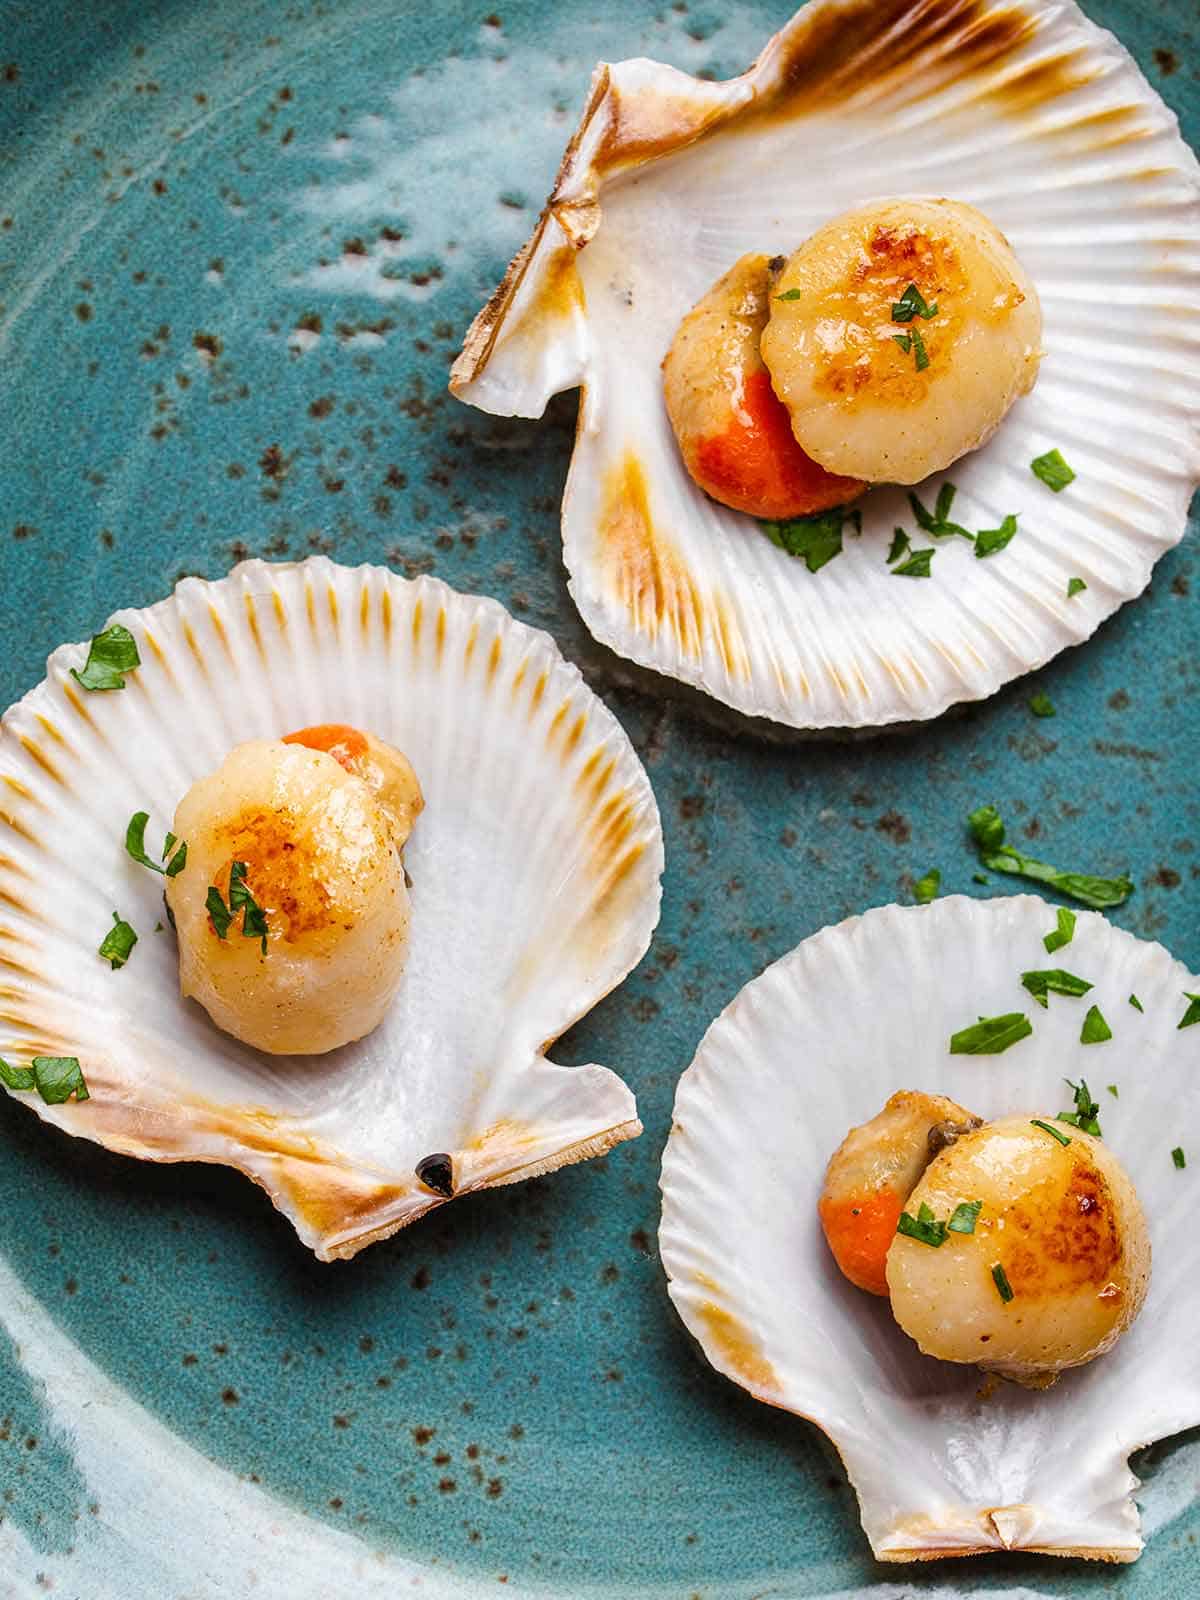 How To Cook Scallops: Experts tips